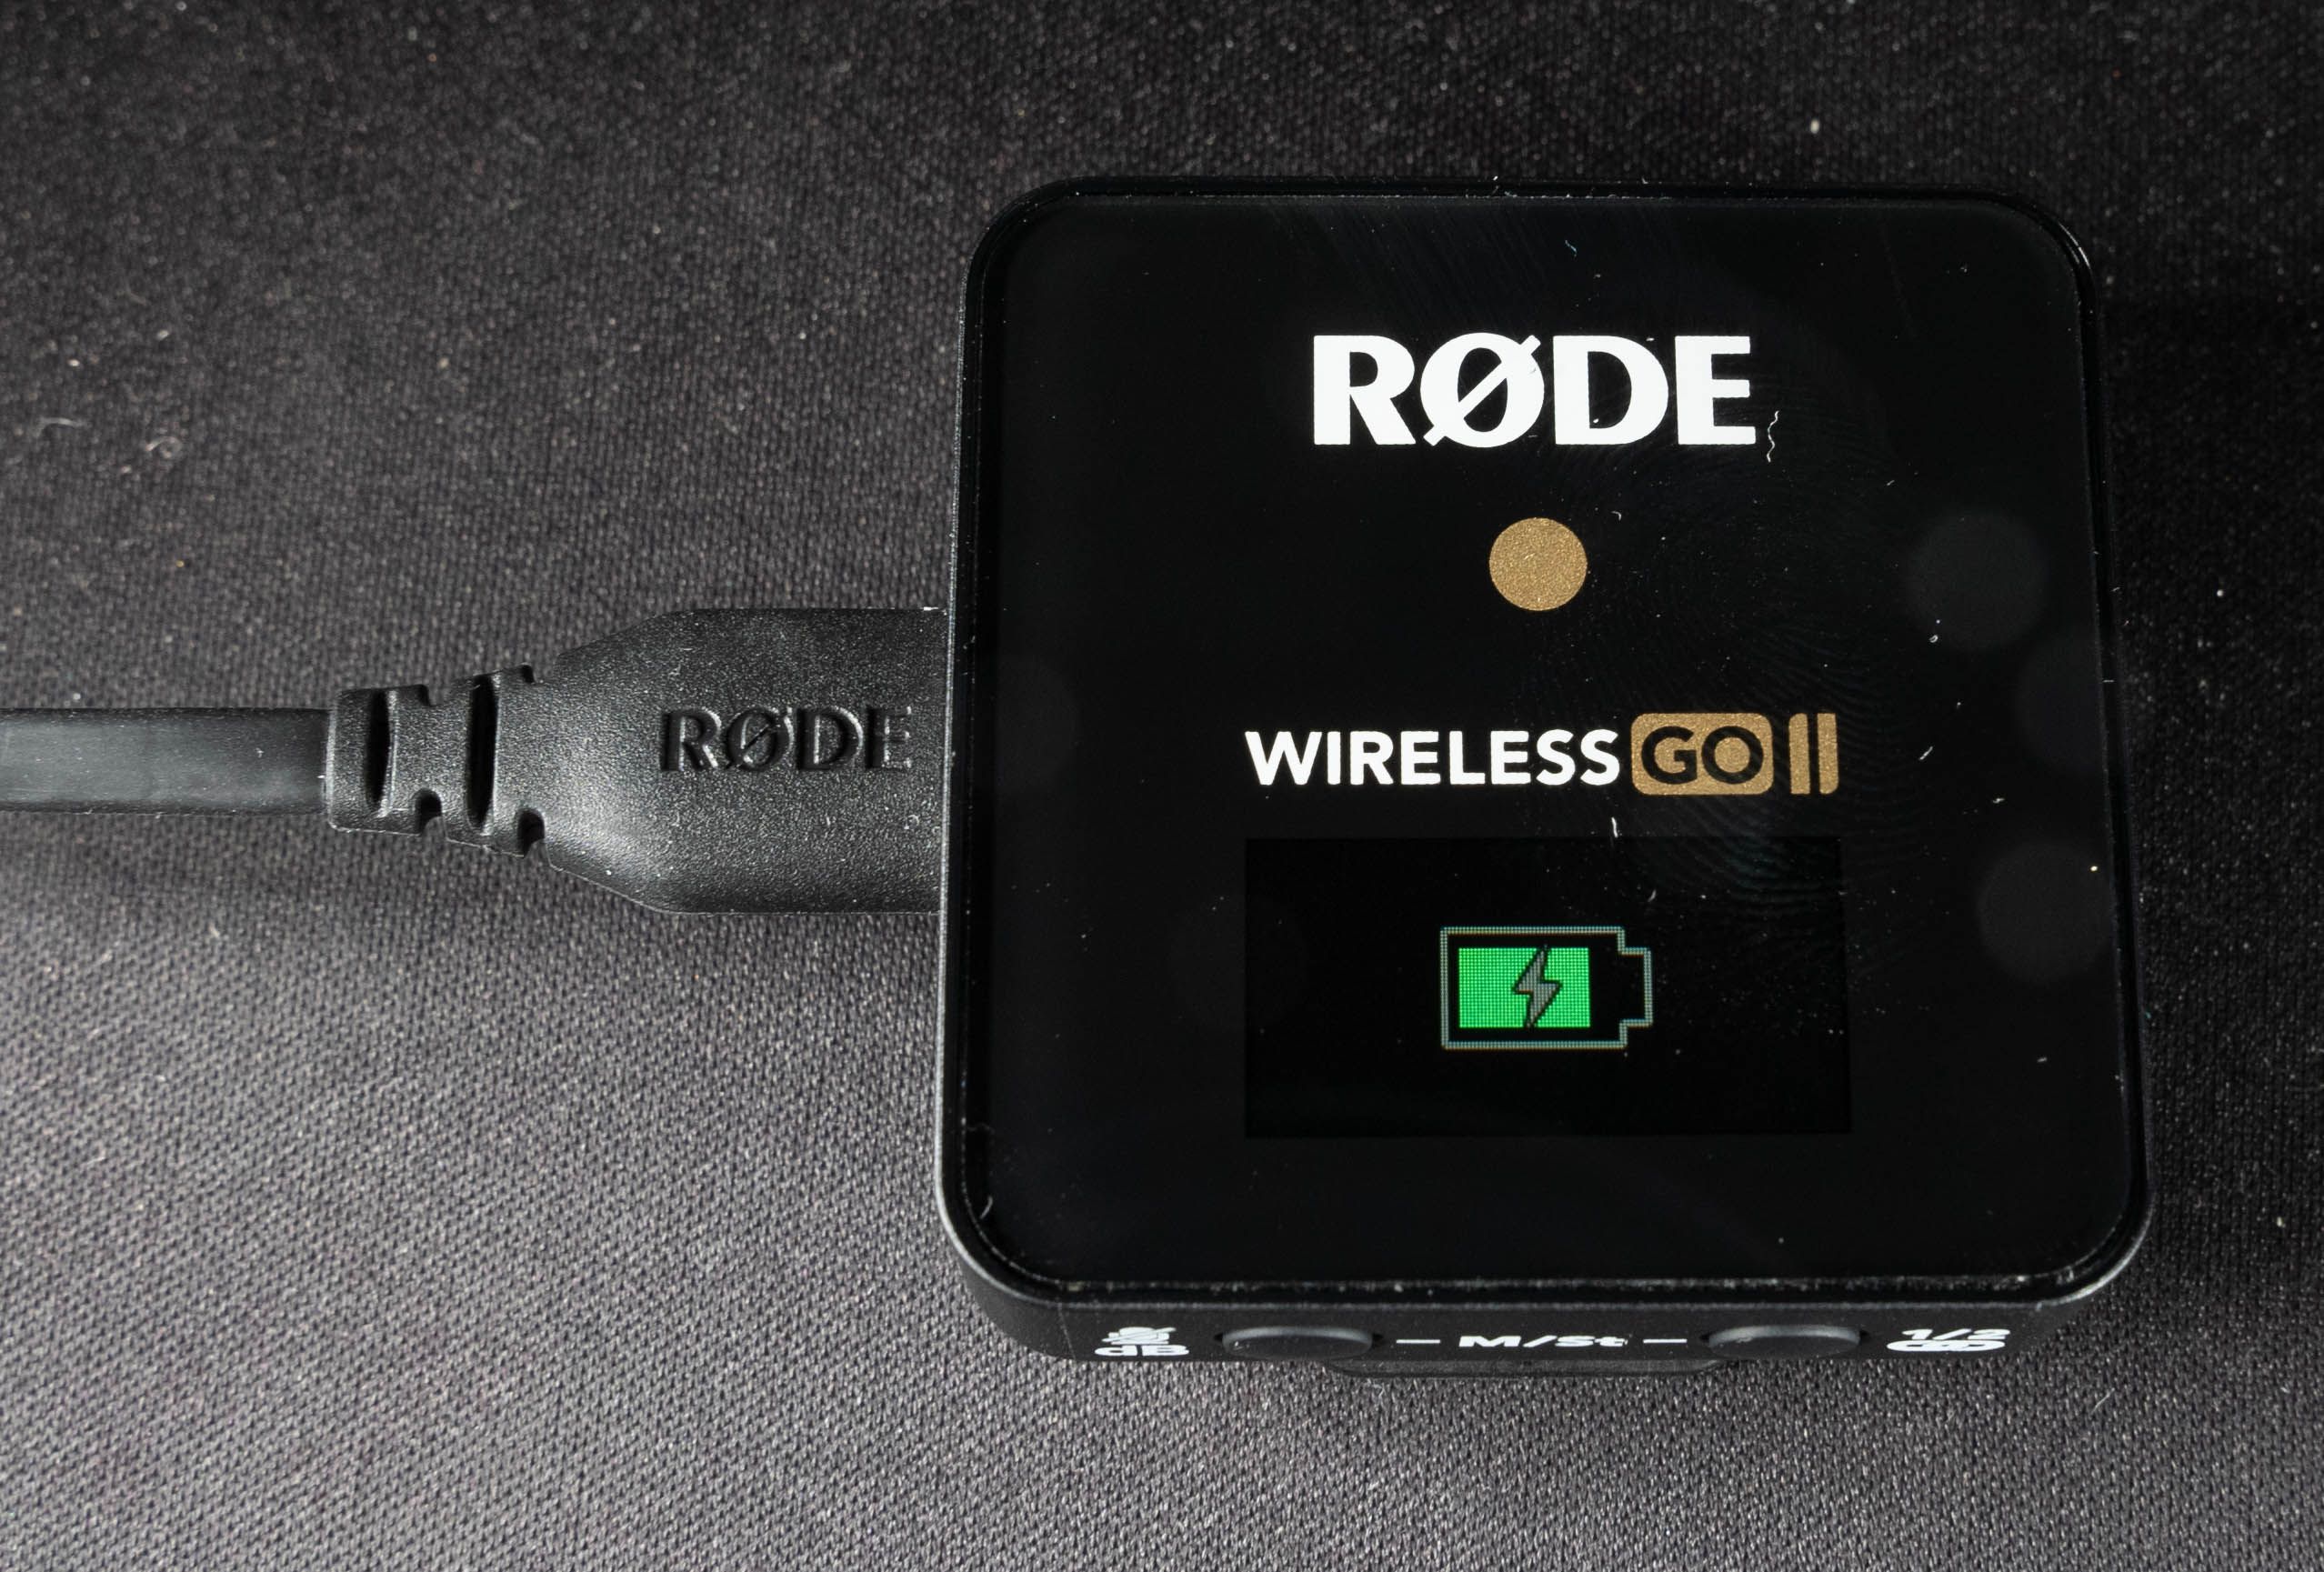 Rode Wireless Go II Transmitter Connected to PC